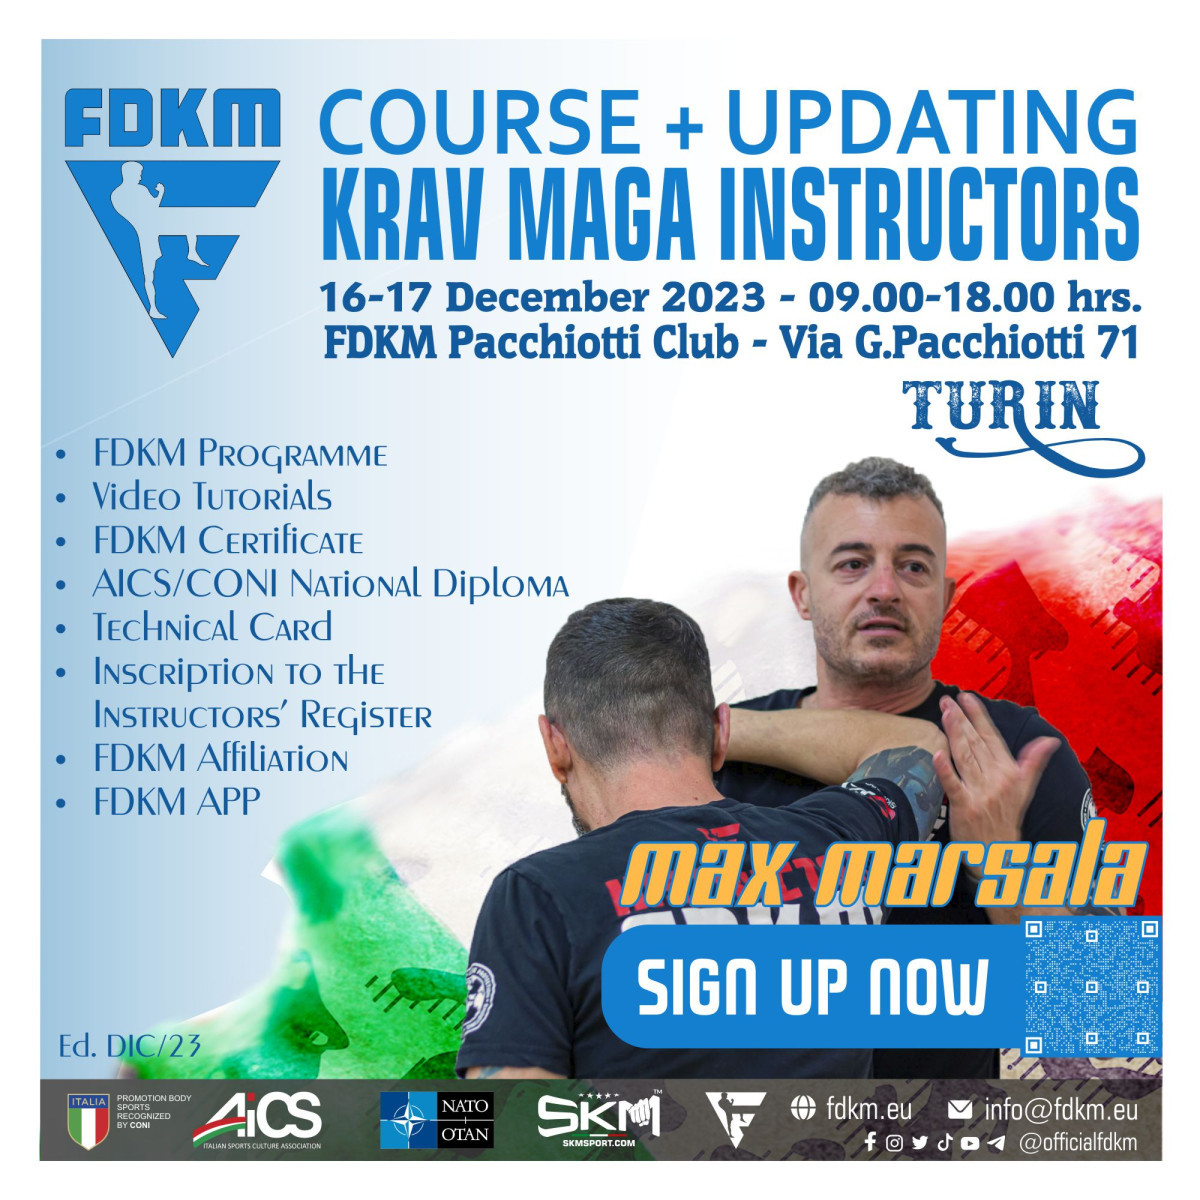 Course and Updating Krav Maga Instructors FDKM Turin 16-17 December 2023